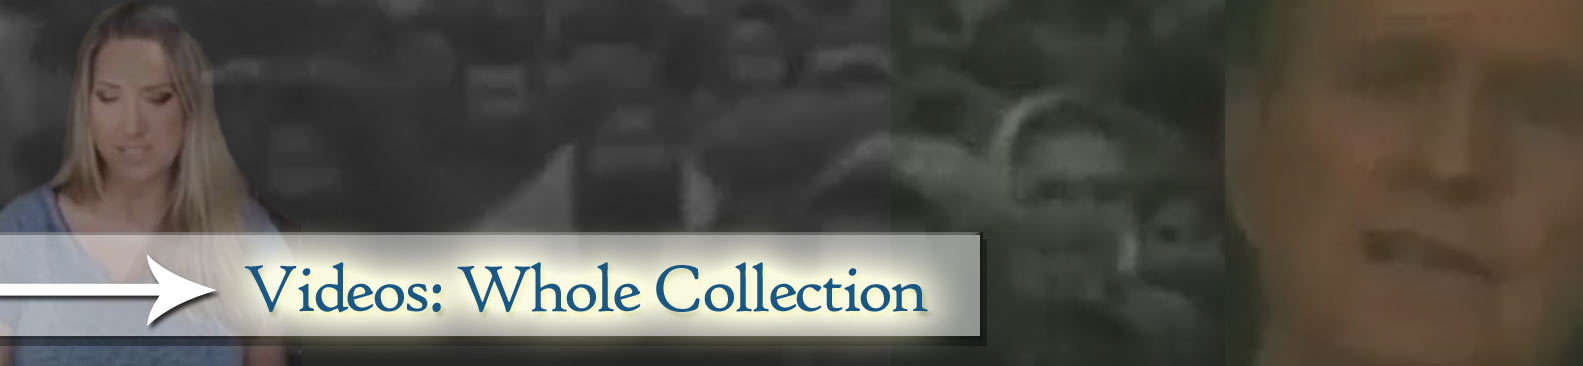 Videos- Whole Collection Banner